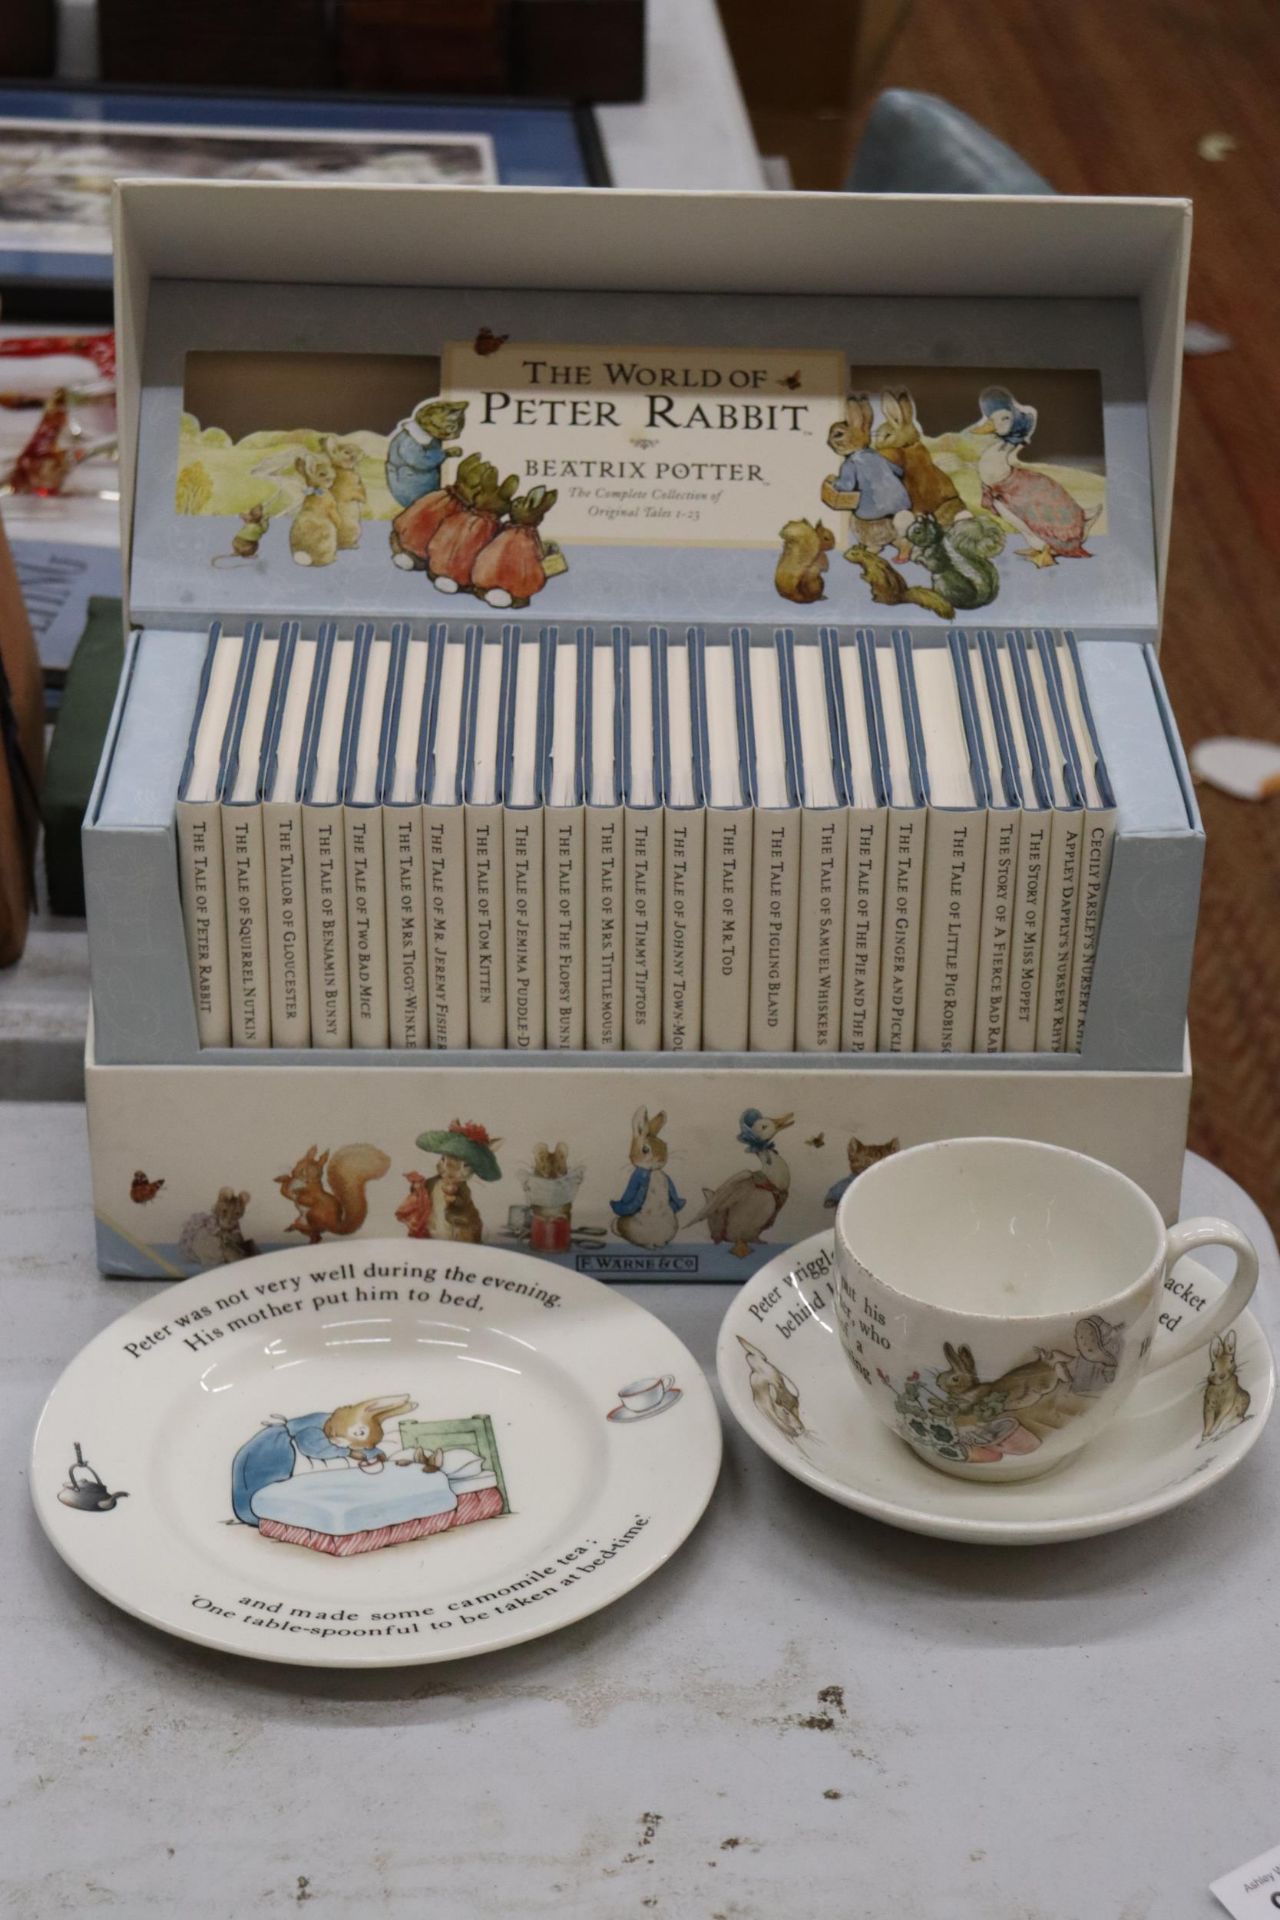 A BOXED 'THE WORLD OF PETER RABBIT' COLLECTION OF BOOKS PLUS THREE PIECES OF WEDGWOOD PETER RABBIT